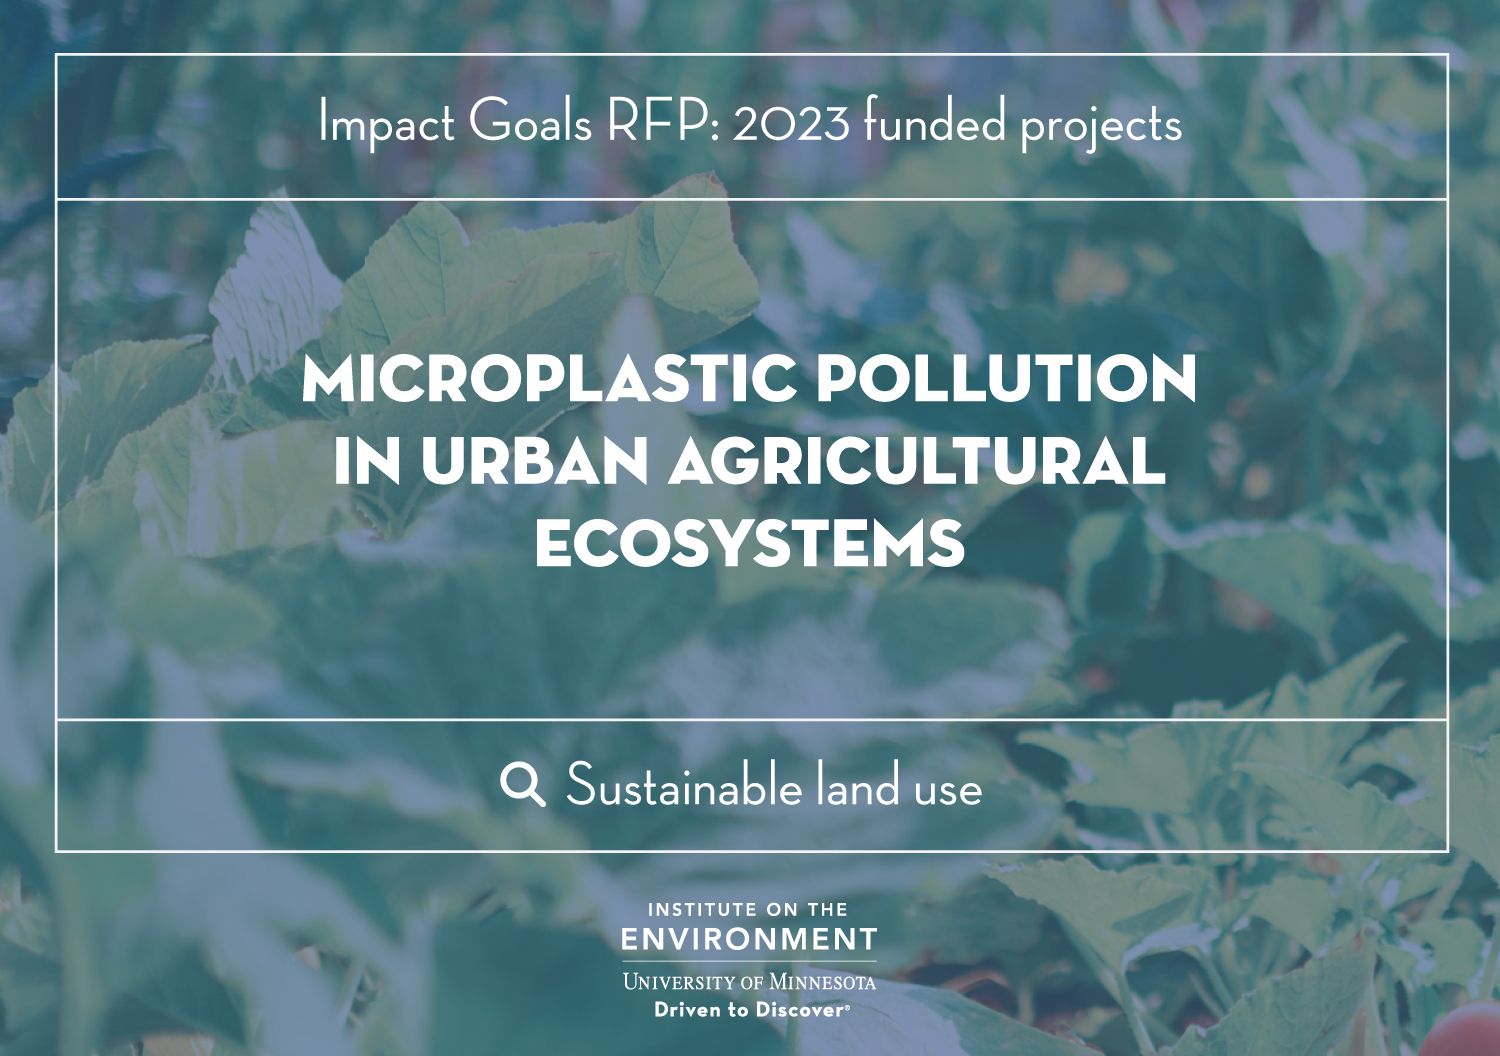 An image of leaves with text that says "Microplastic pollution in urban agricultural ecosystems"